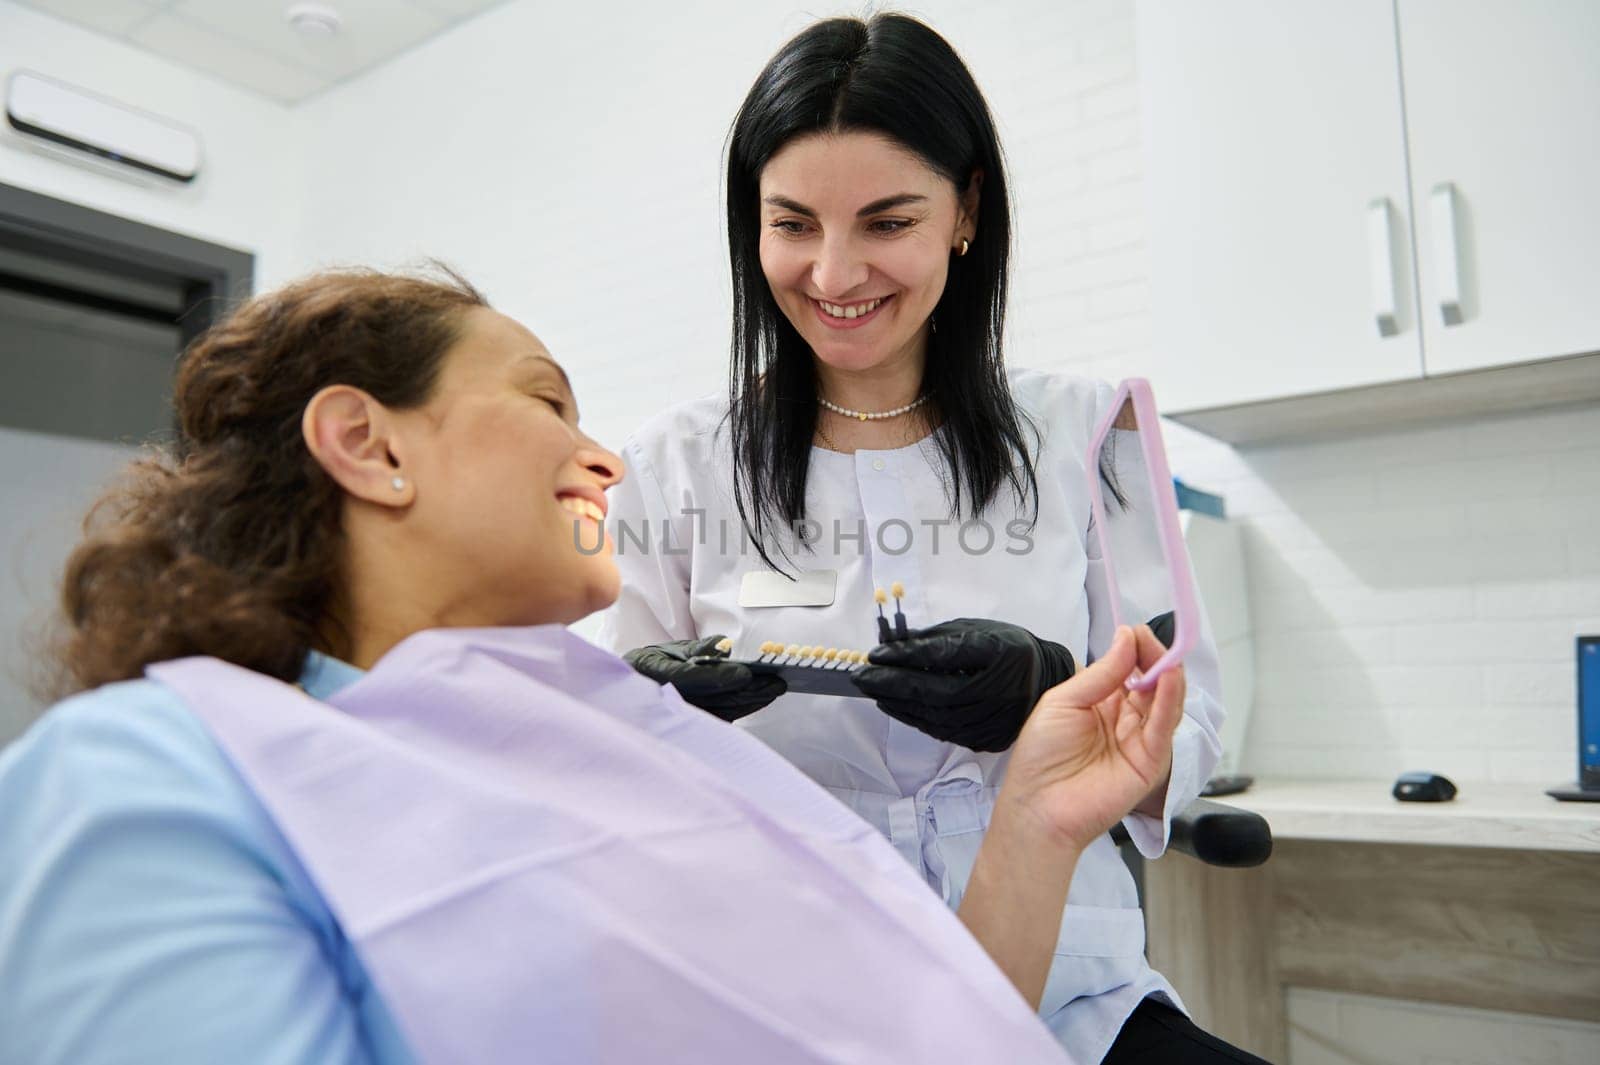 Dental surgeon comparing female patient teeth with shade guide according to Vita scale. Smiling happy woman looking at her mirror reflection after teeth whitening procedure in dentistry clinic